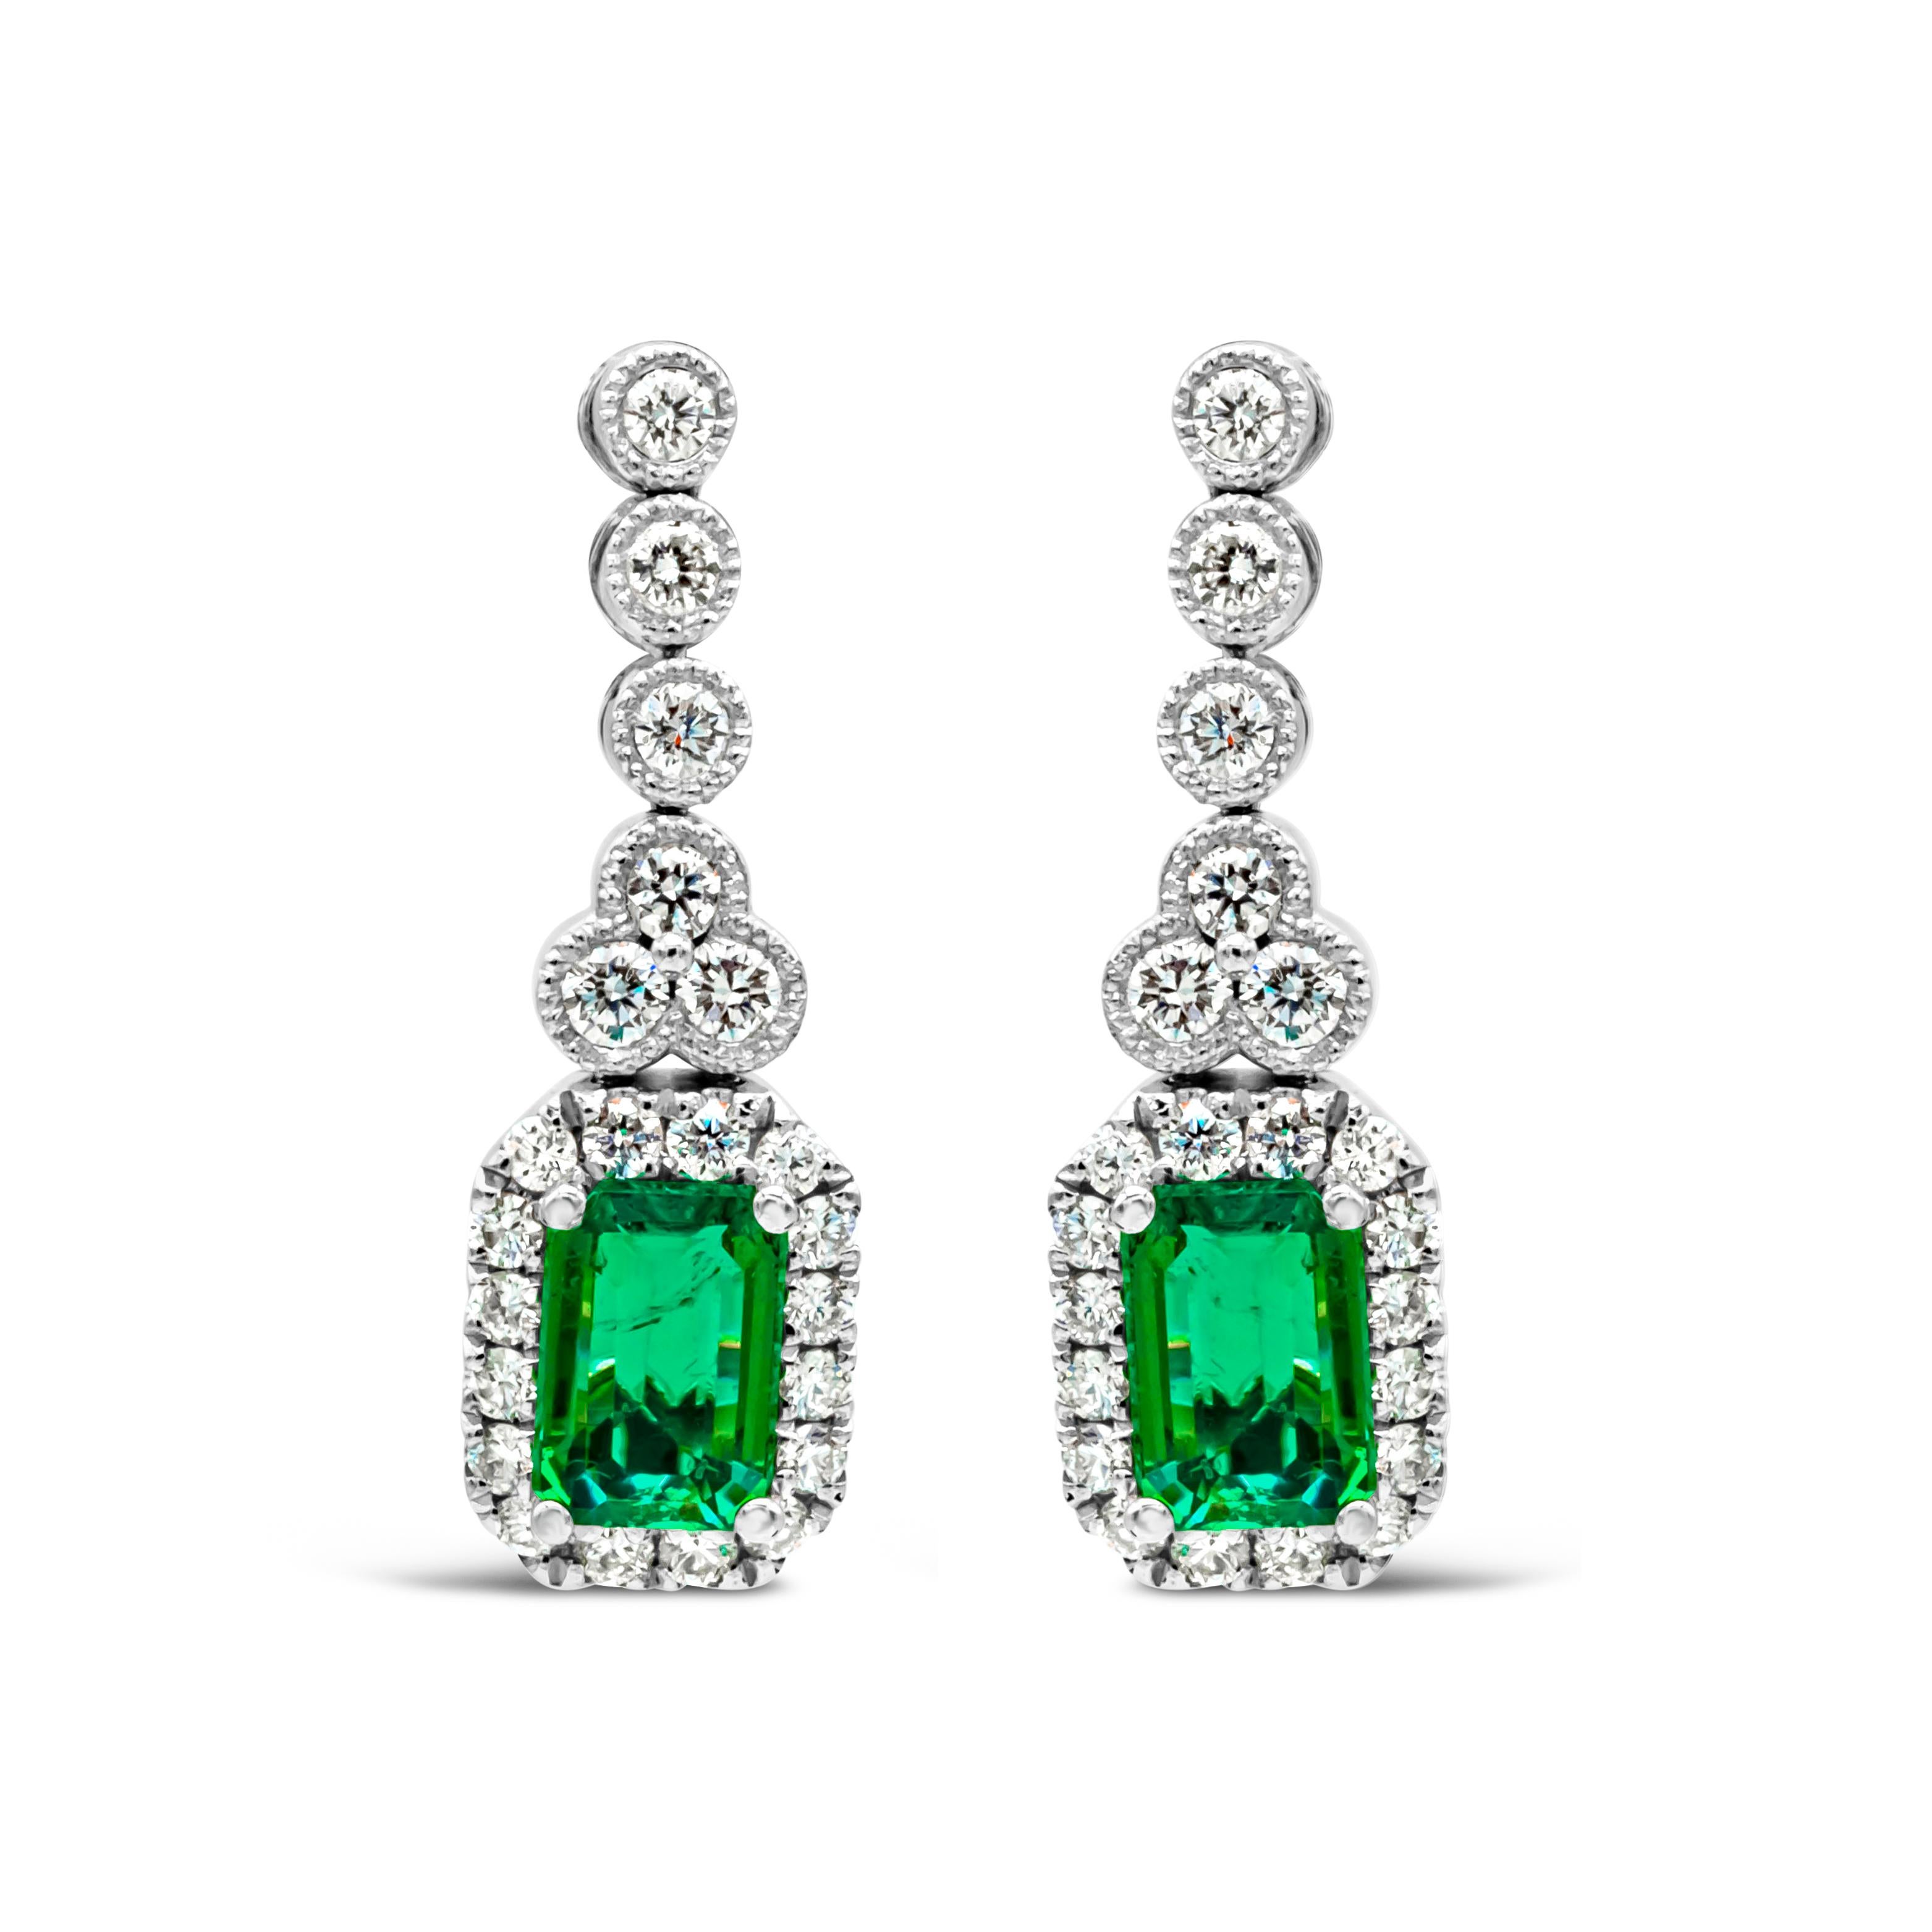 Each earring showcases a very fine emerald cut green emerald weighing 1.02 carats total, set in a classic four prong setting. Surrounded by a single row of round brilliant diamonds and suspended on a bezel set round diamonds weighing 0.52 carats